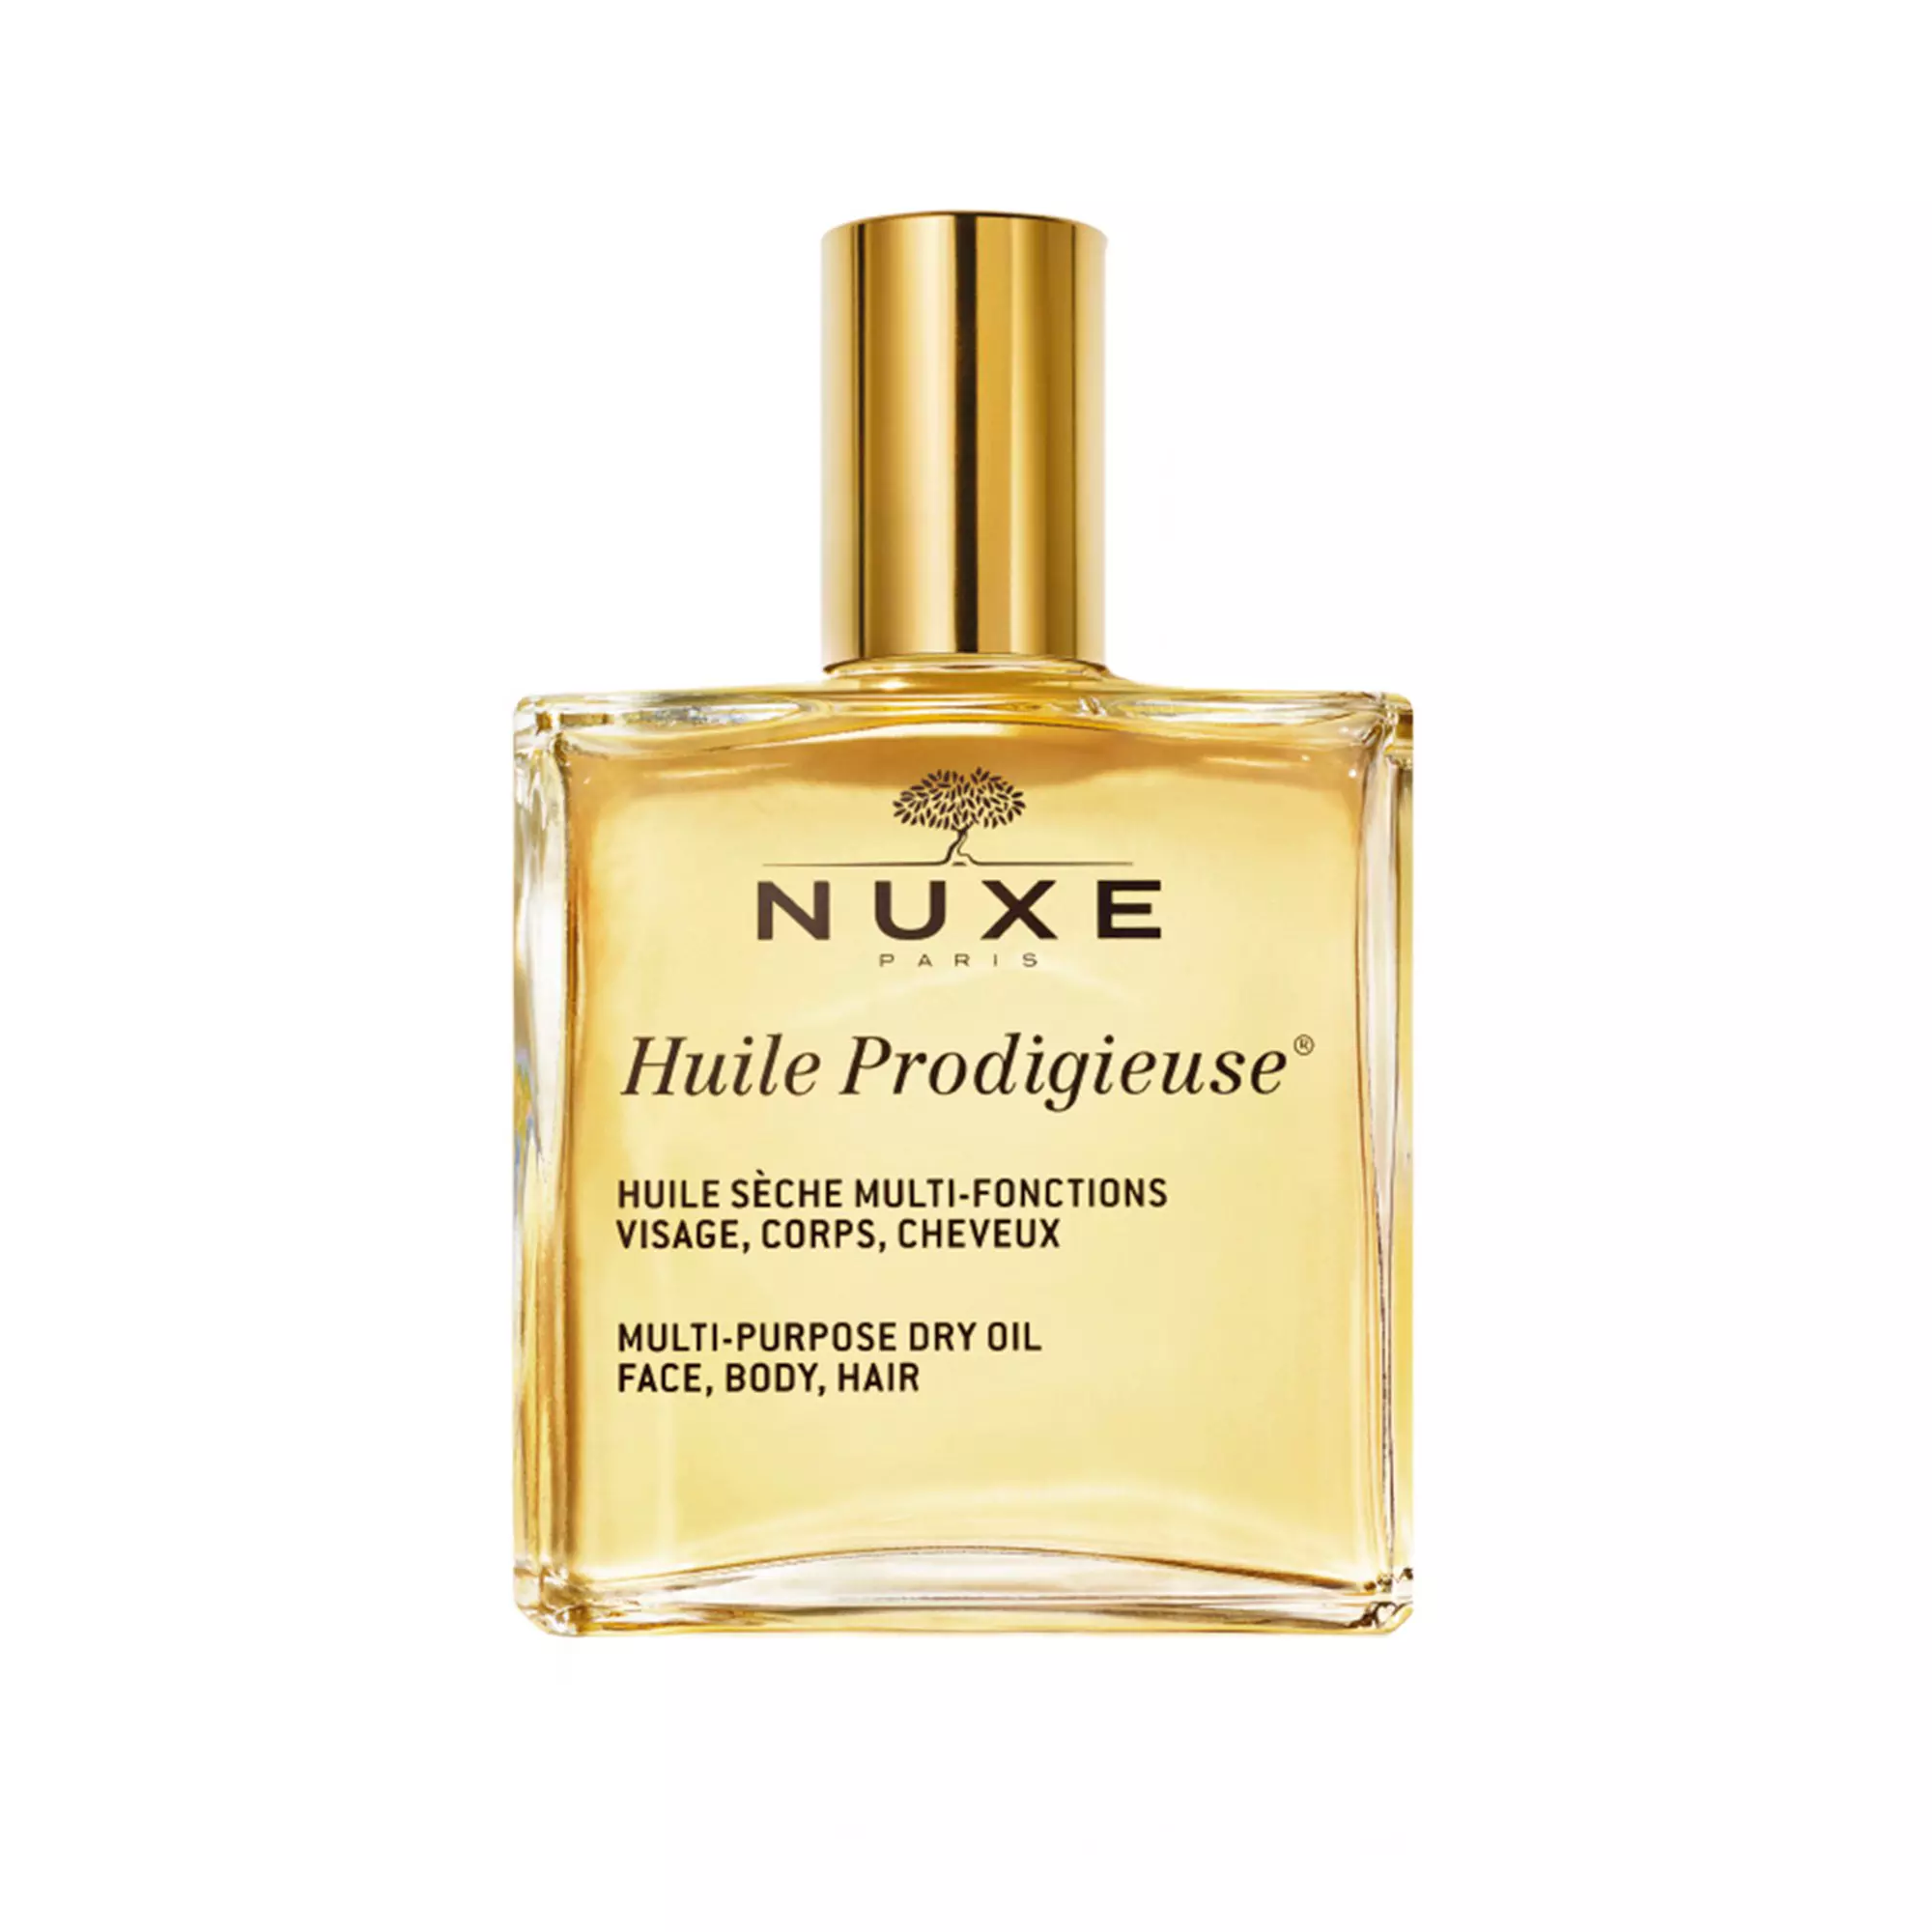 Nuxe Huile Prodigieuse Face And Body